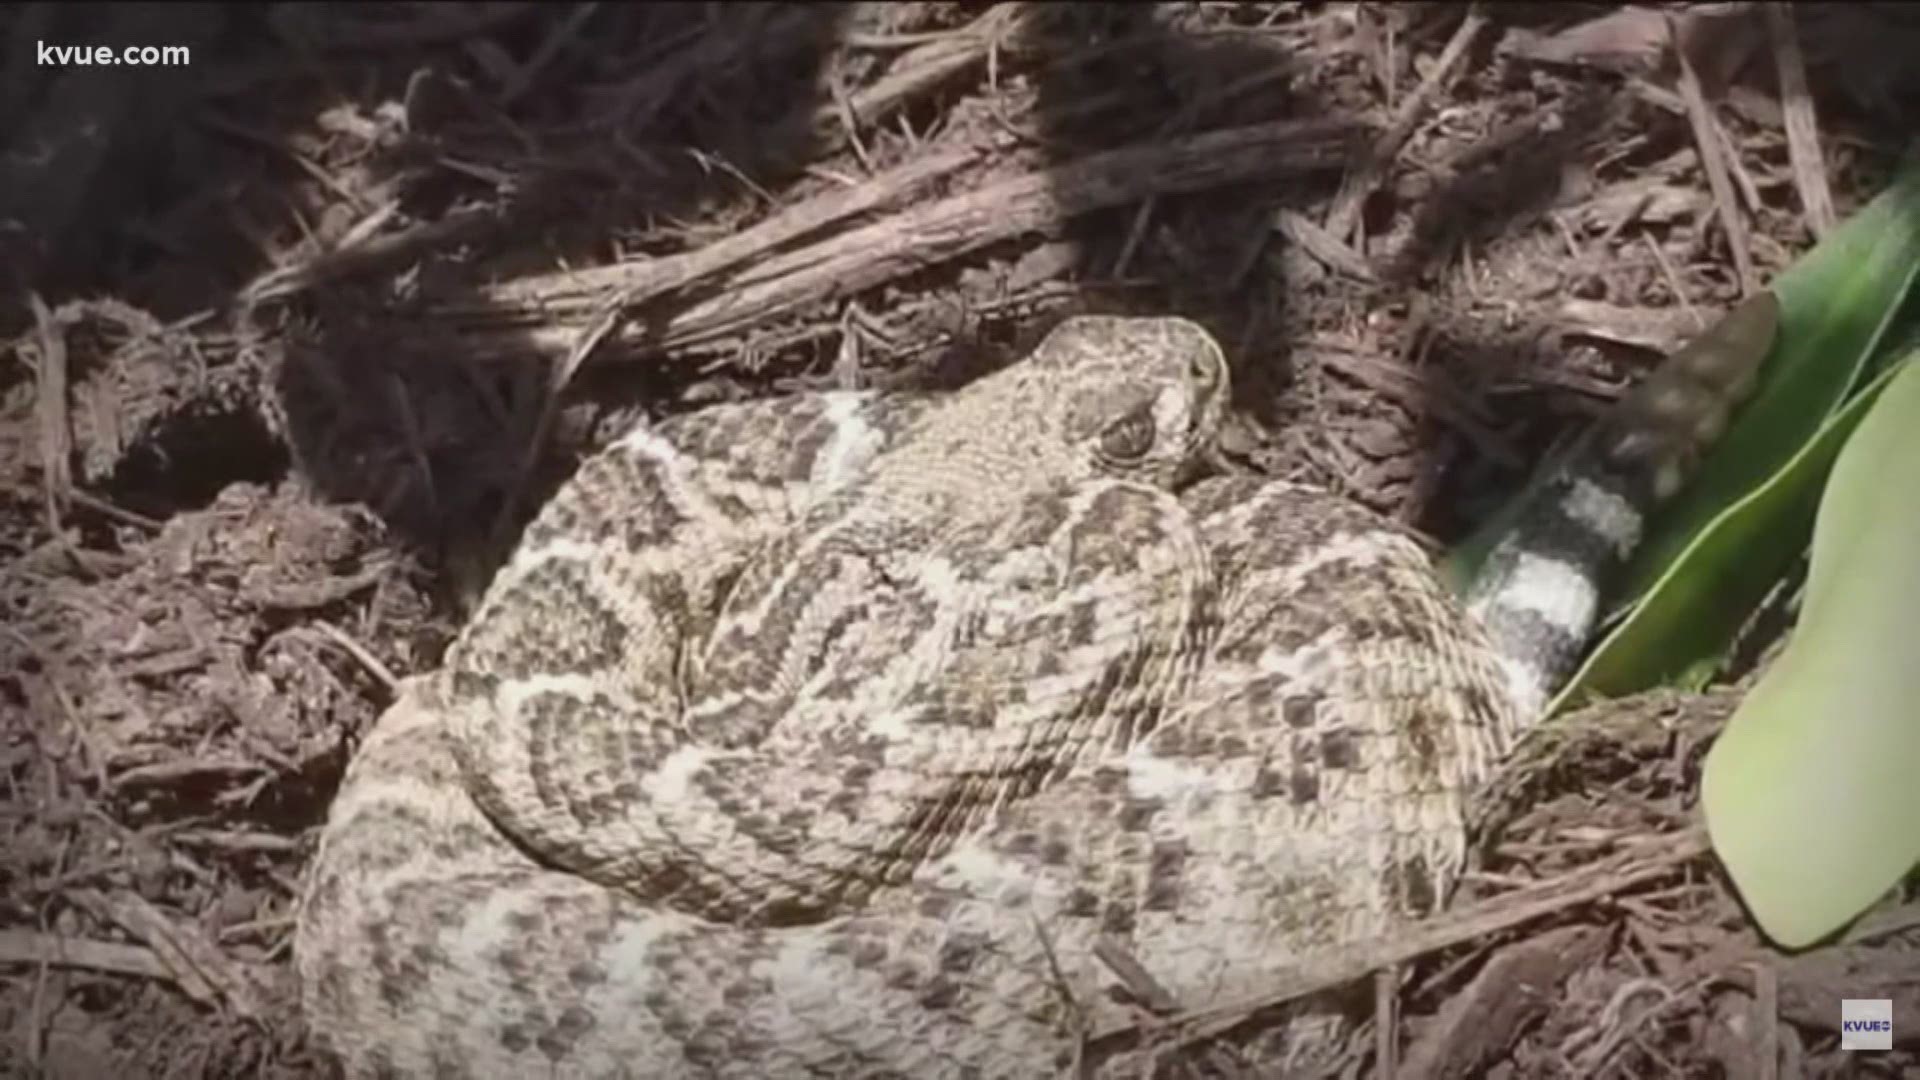 This is the time of year snakes are out and about in Central Texas. Here's how to spot the dangerous ones.